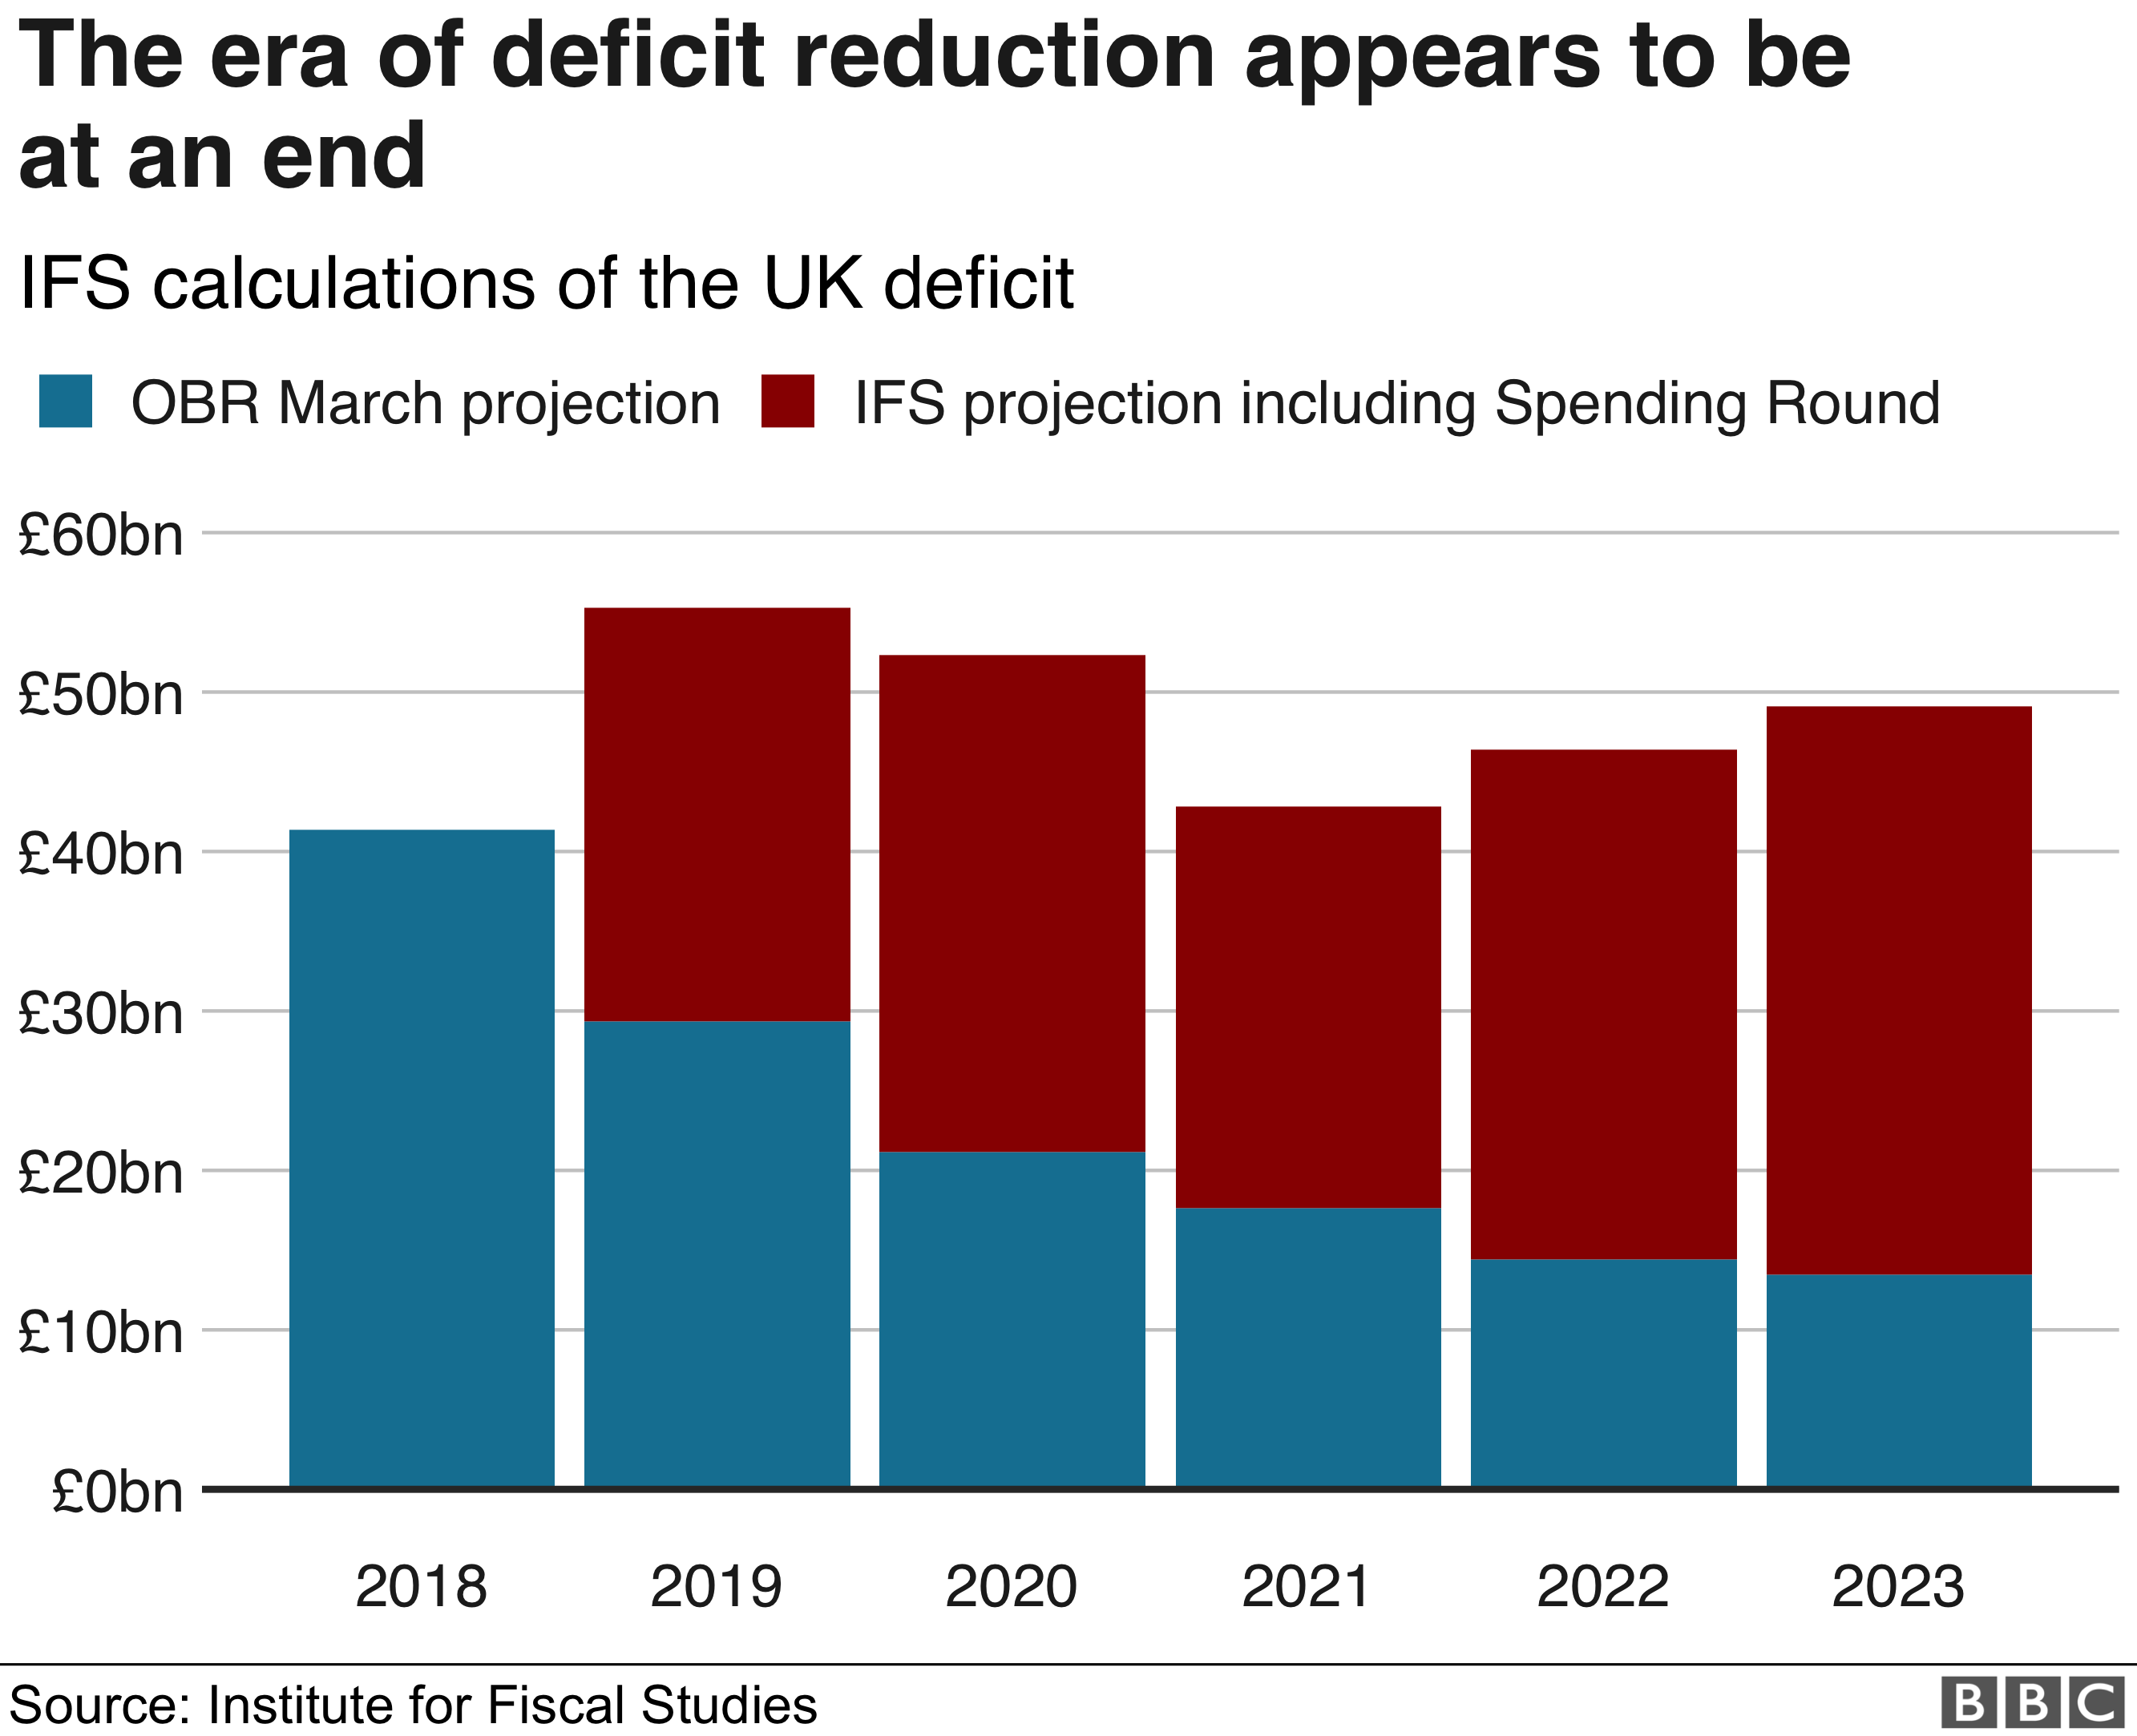 Chart on forecast deficit reduction